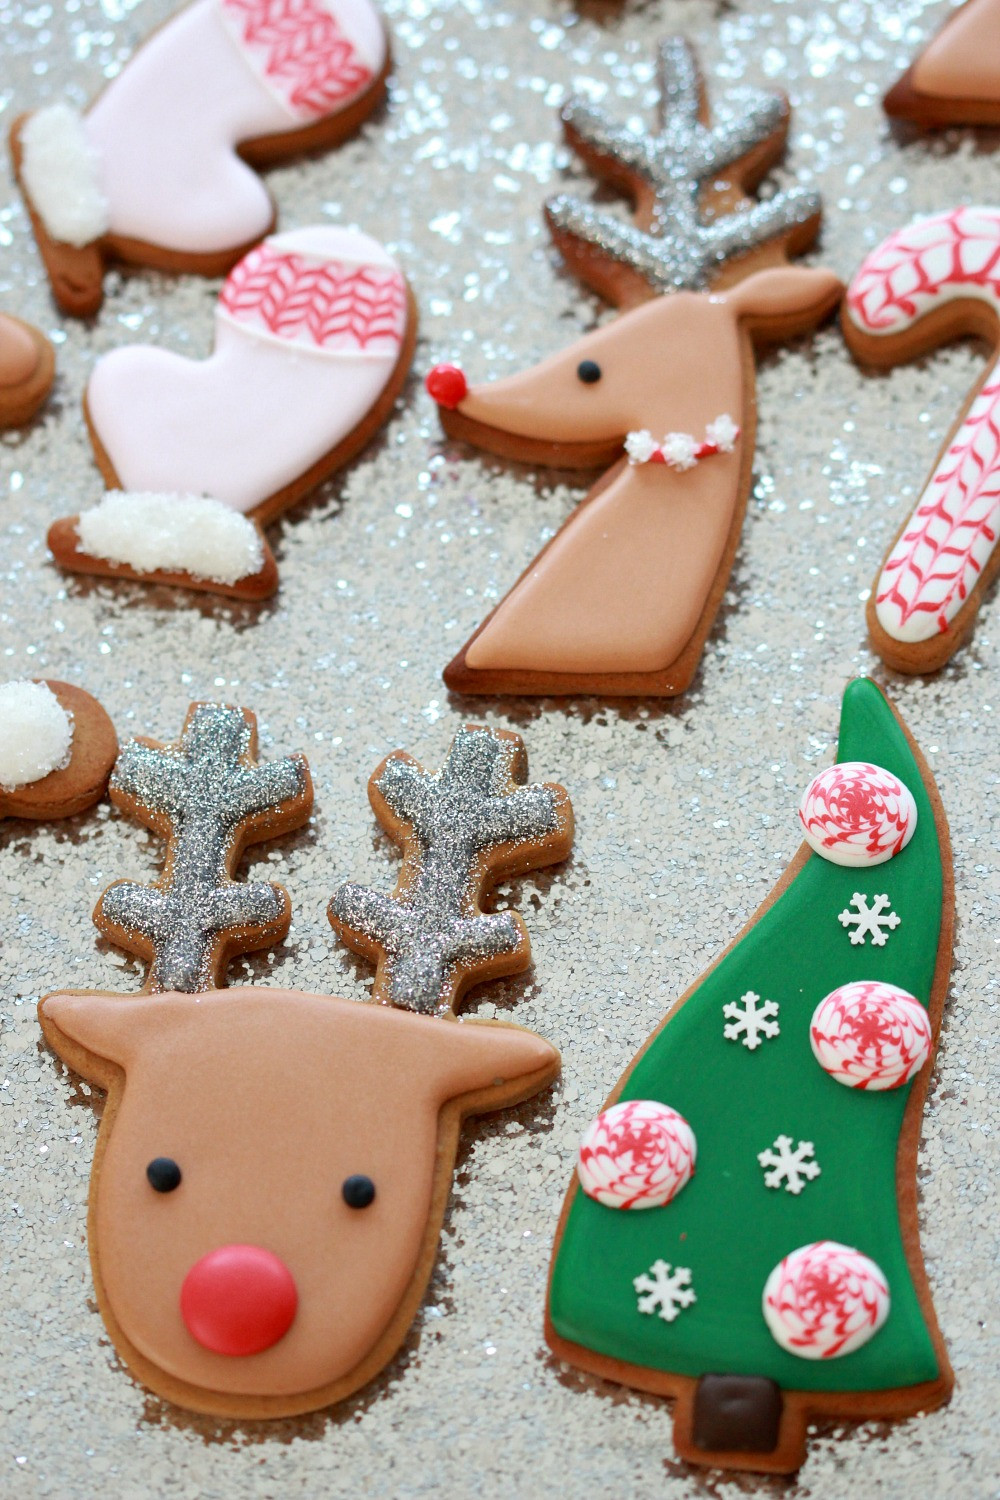 Decorate Christmas Cookies
 Video How to Decorate Christmas Cookies Simple Designs